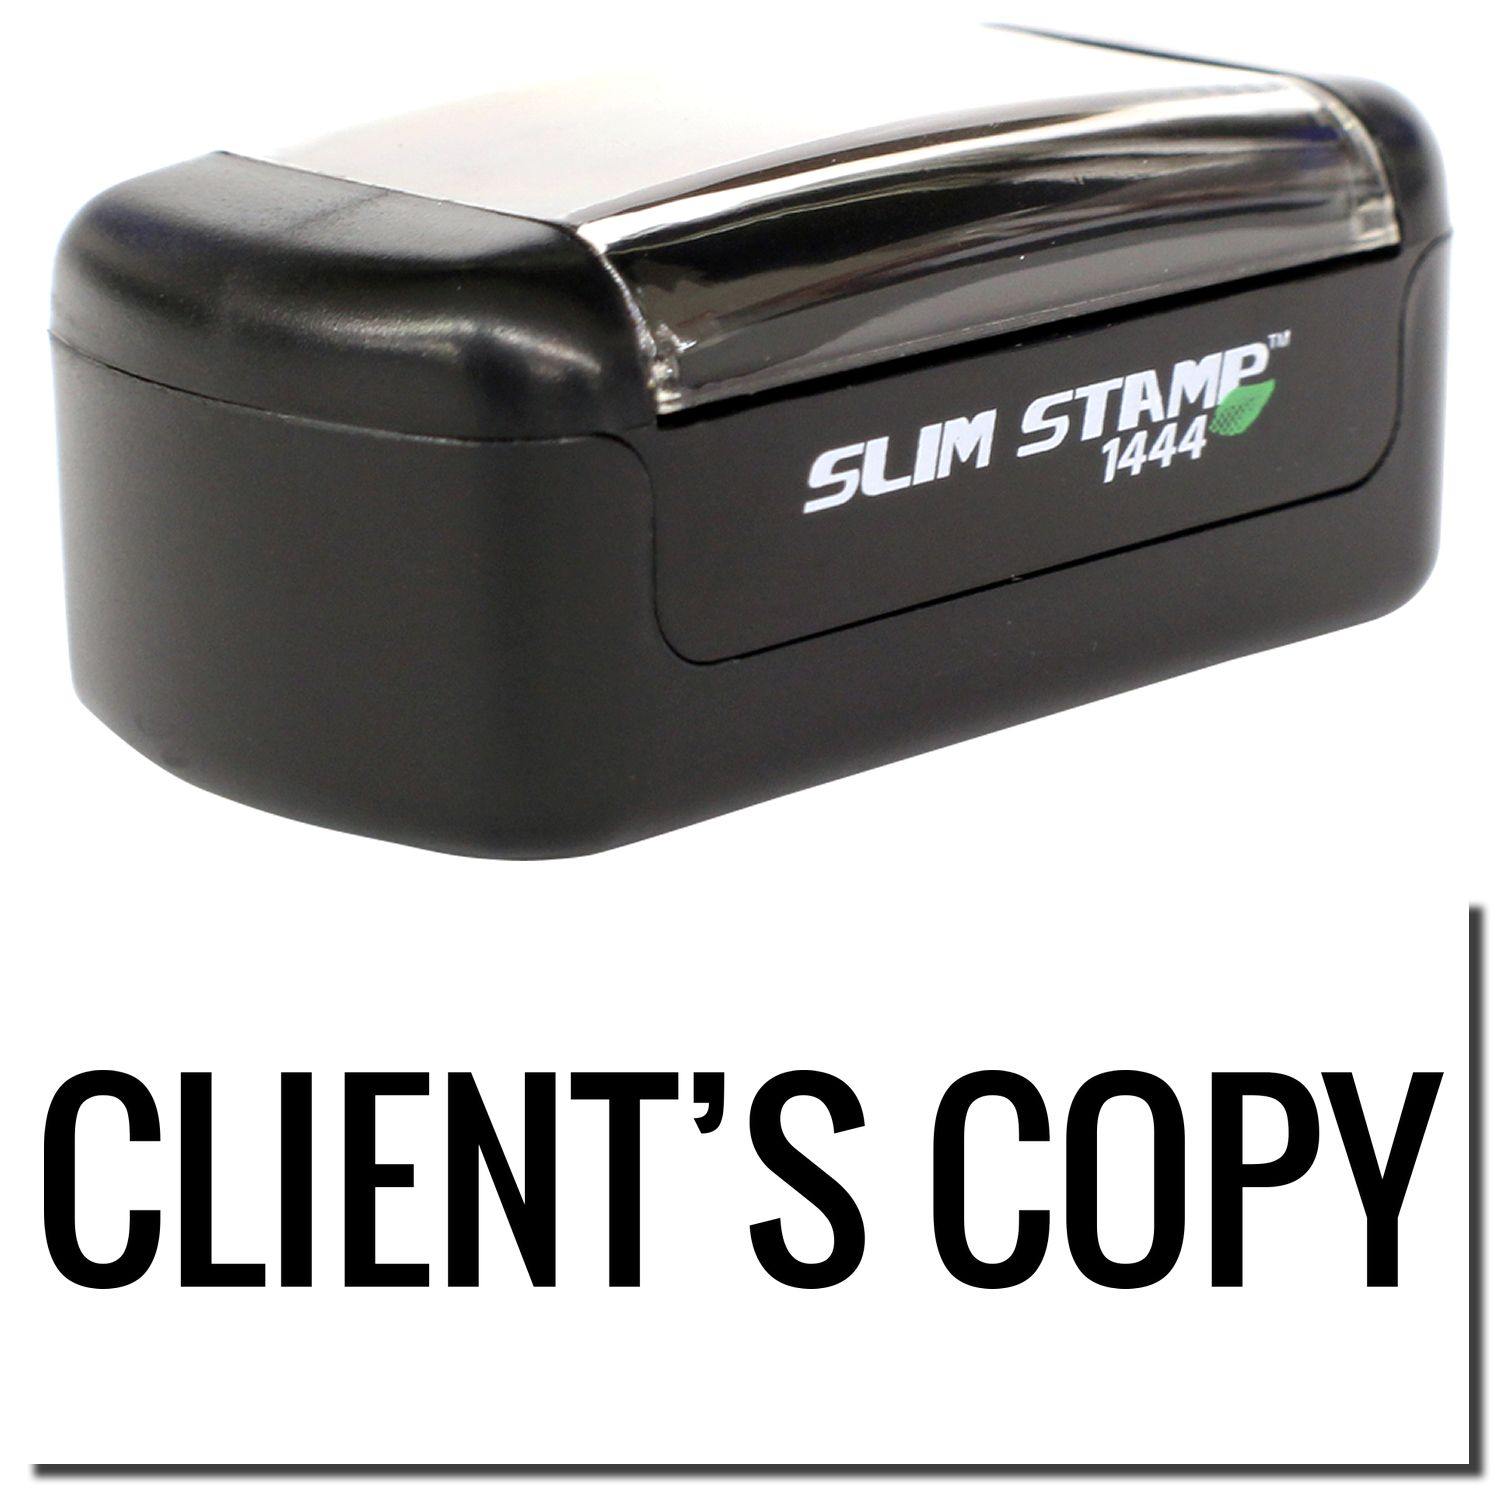 A stock office pre-inked stamp with a stamped image showing how the text "CLIENT'S COPY" is displayed after stamping.